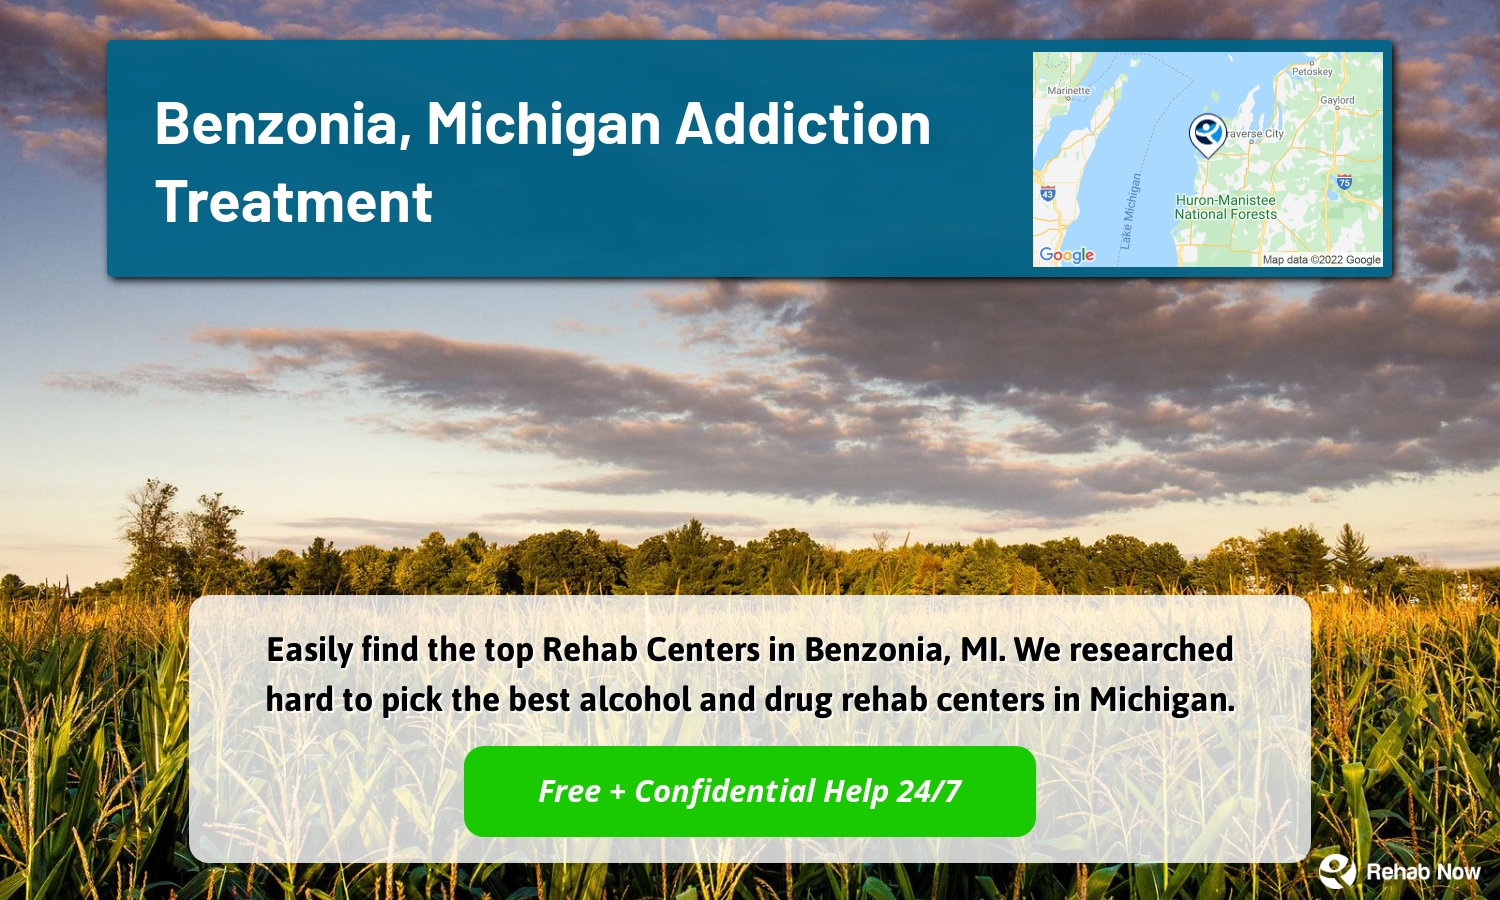 Easily find the top Rehab Centers in Benzonia, MI. We researched hard to pick the best alcohol and drug rehab centers in Michigan.